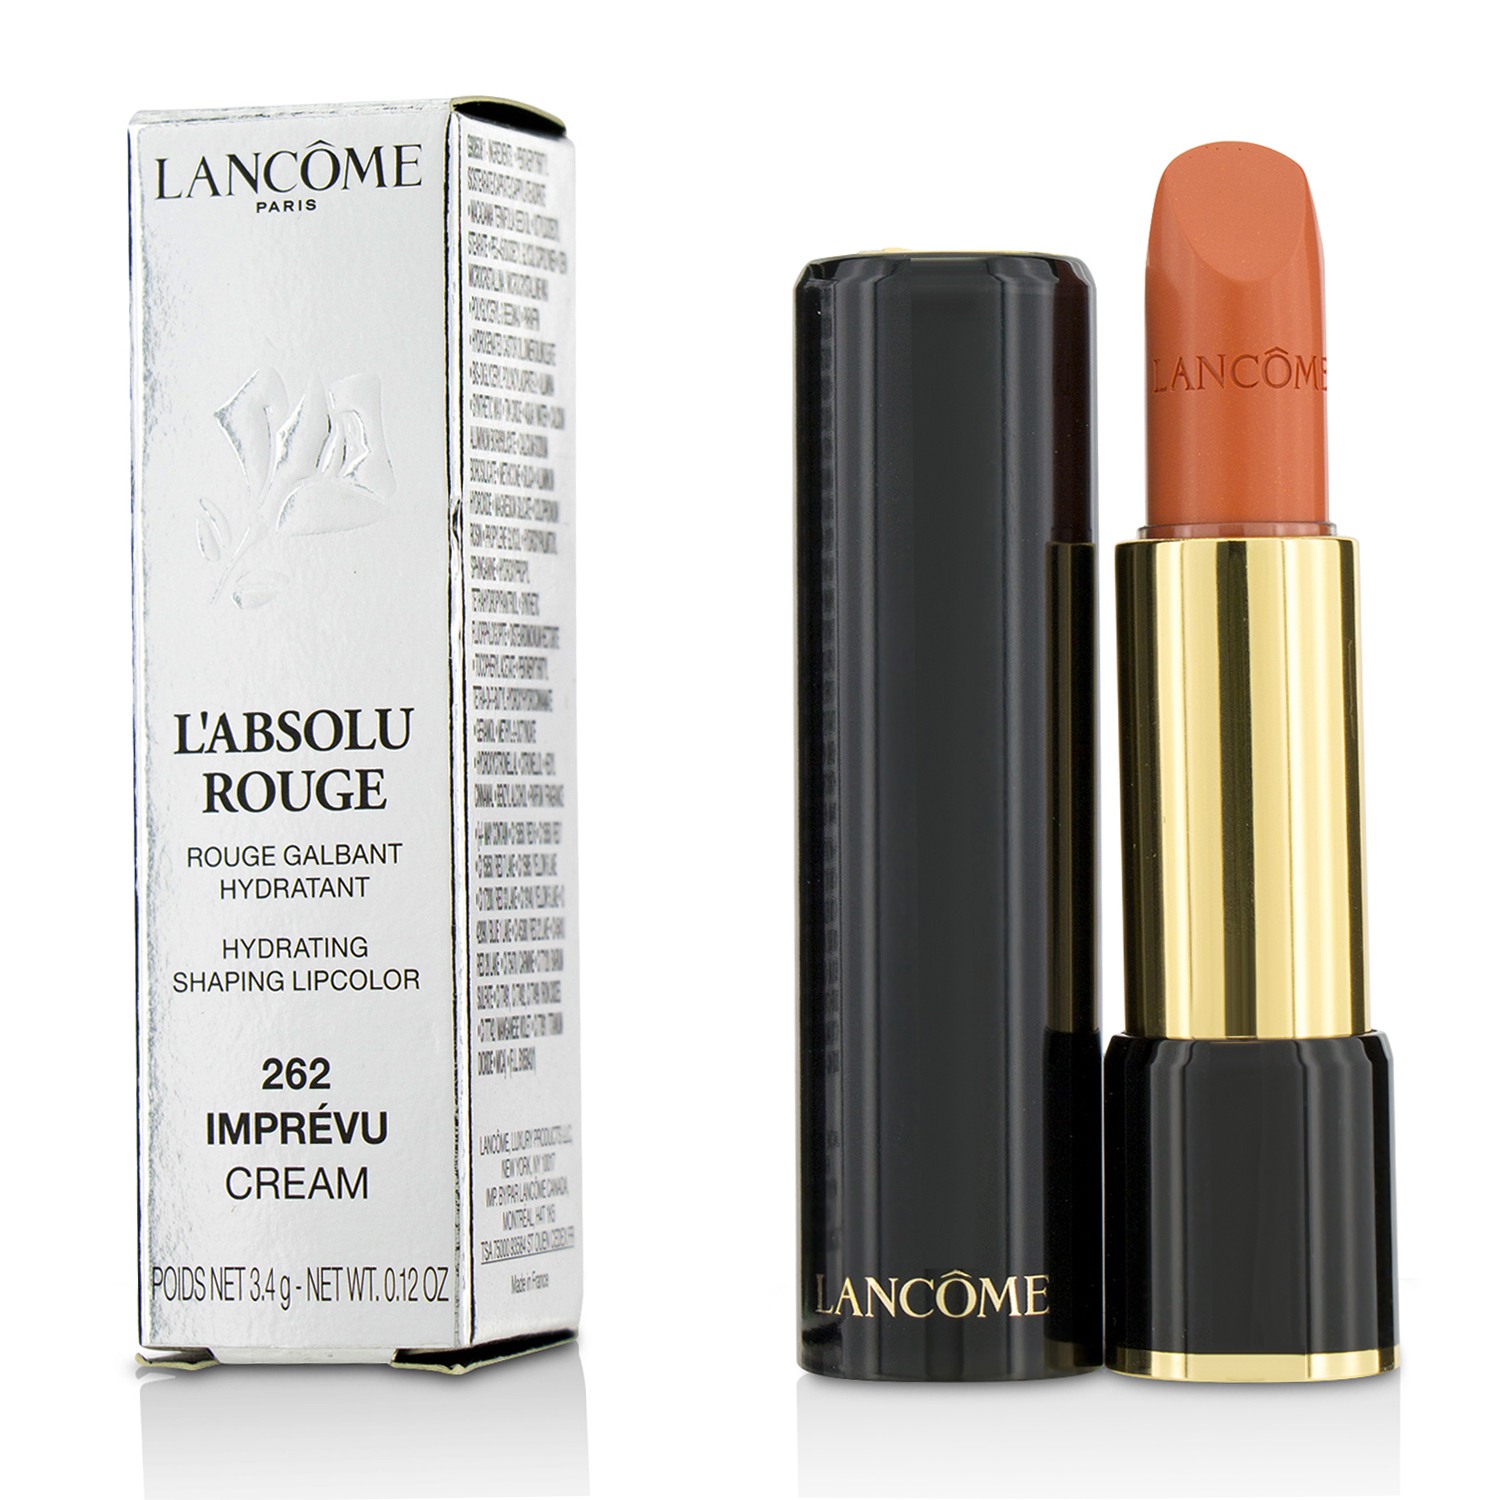 L Absolu Rouge Hydrating Shaping Lipcolor - # 262 Imprevu (Cream) Lancome Image